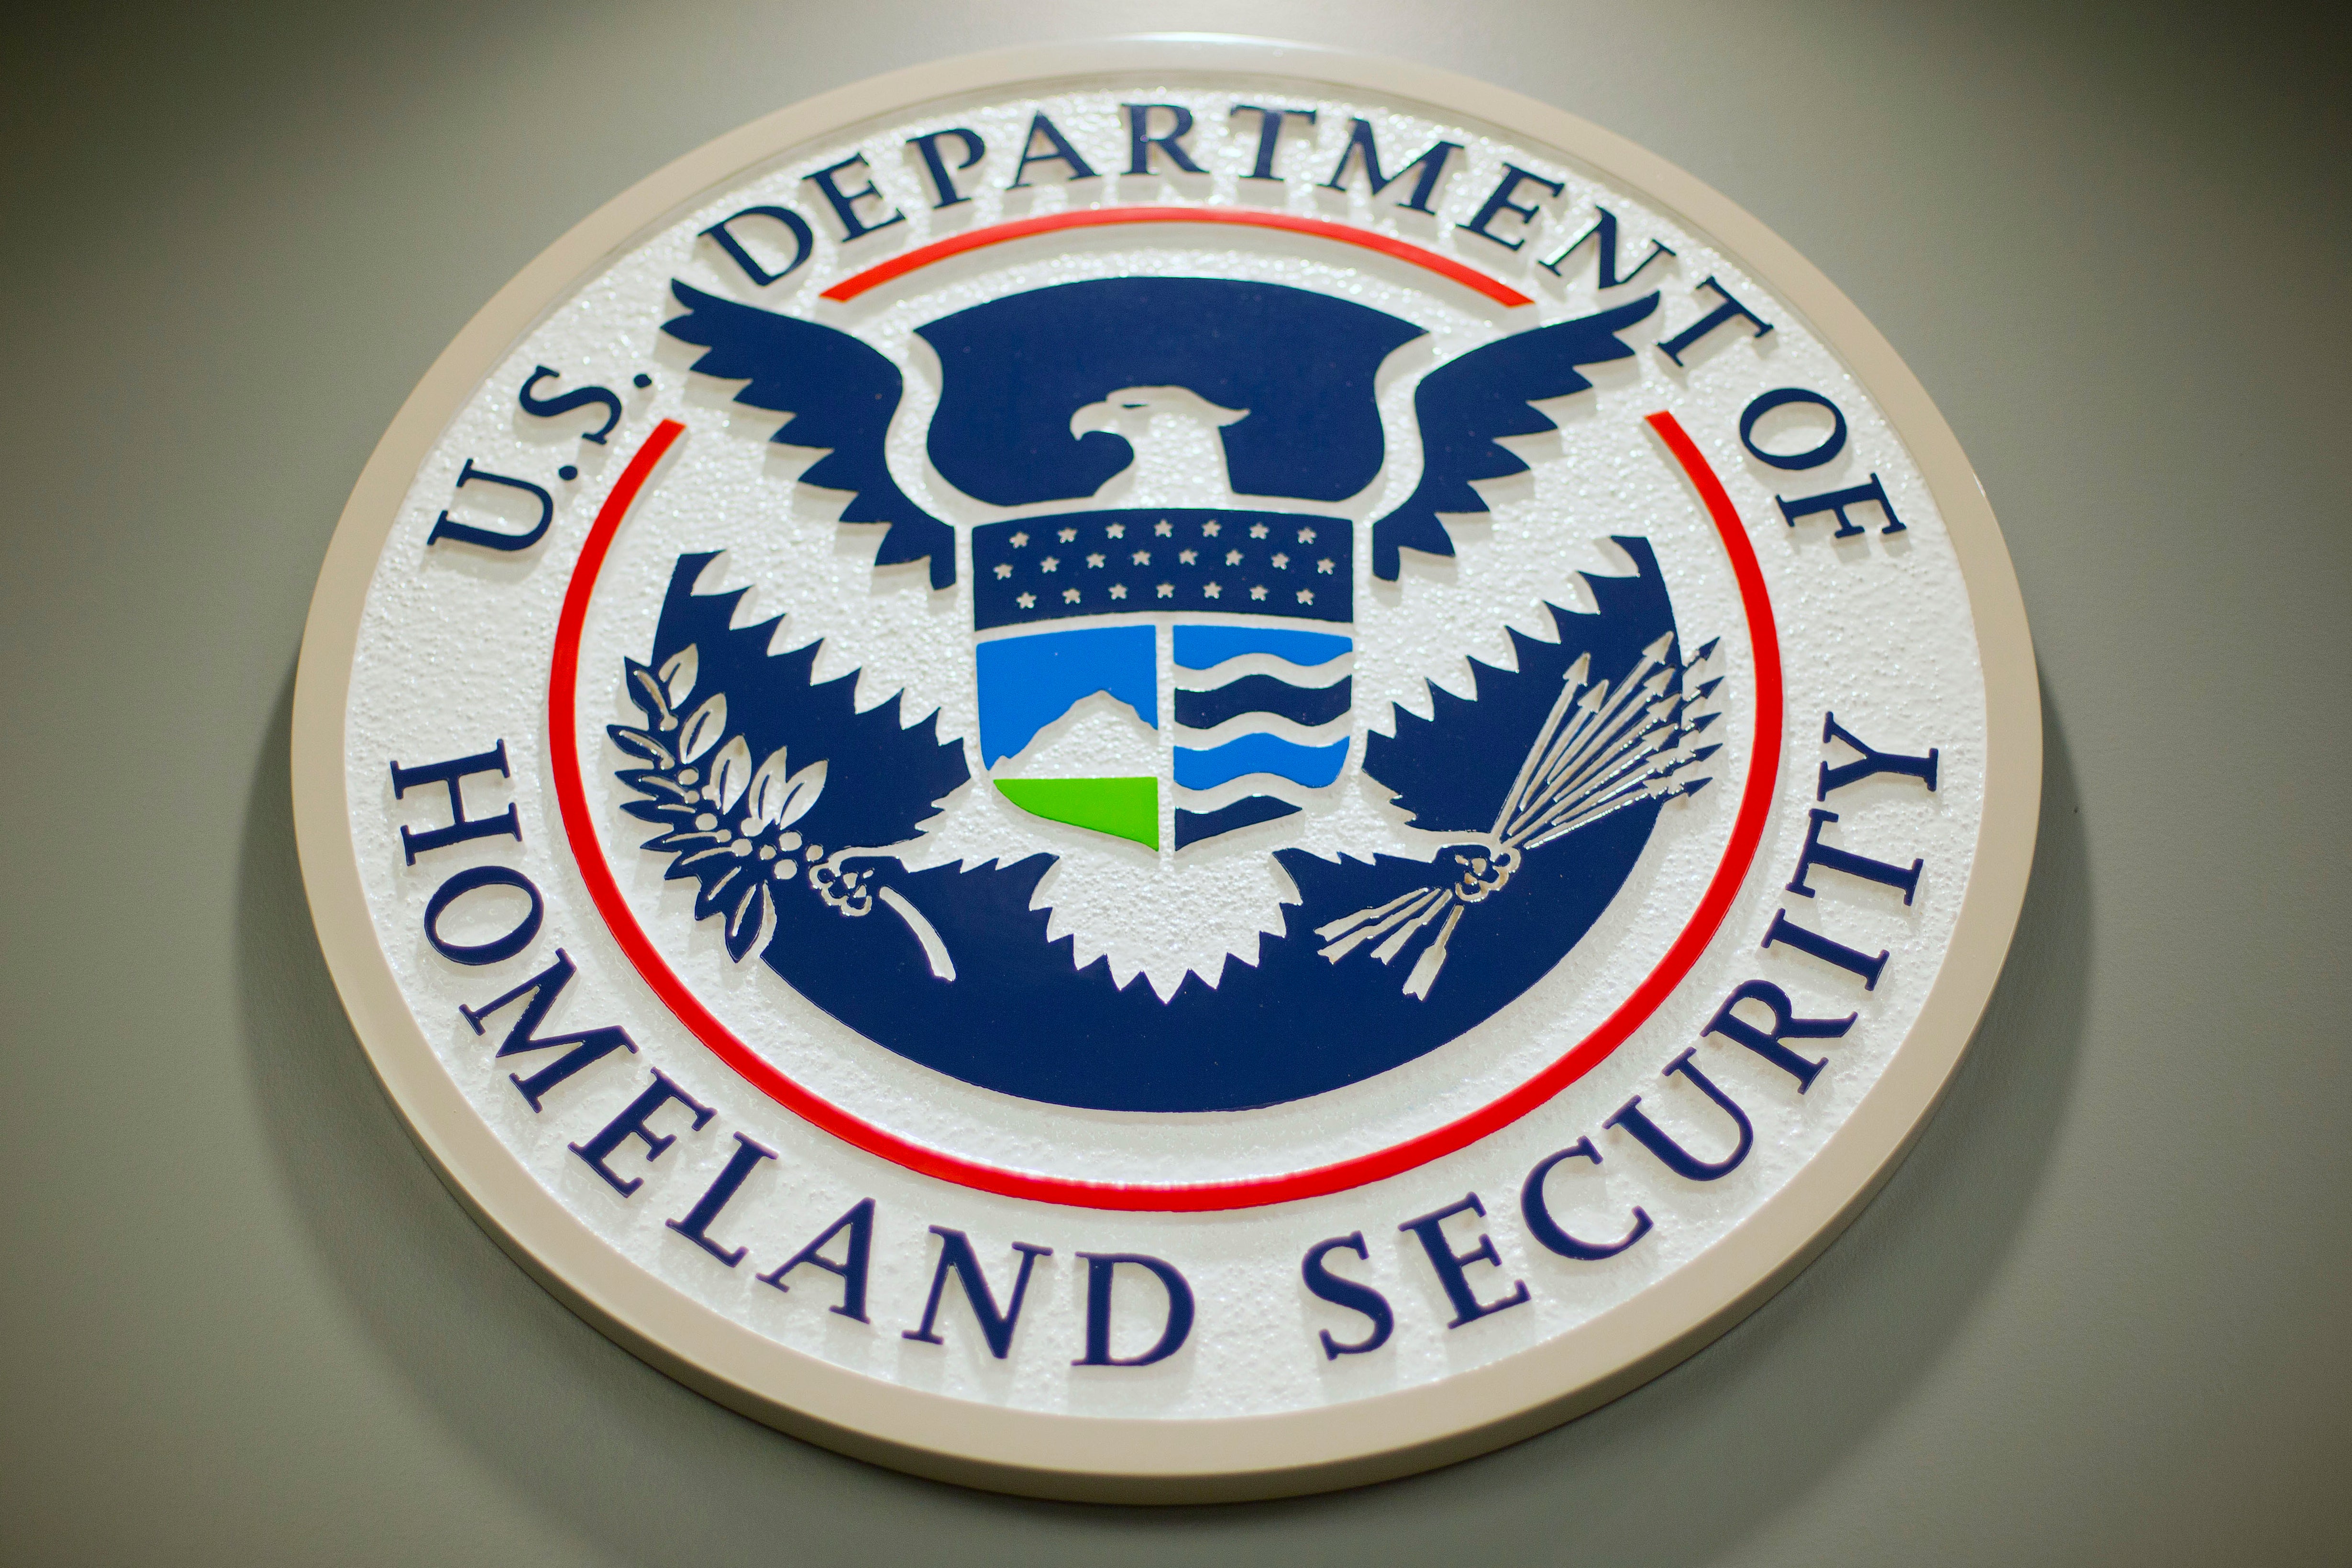 The US Department of Homeland Security announced that Real ID enforcement will begin on 7 May 2025